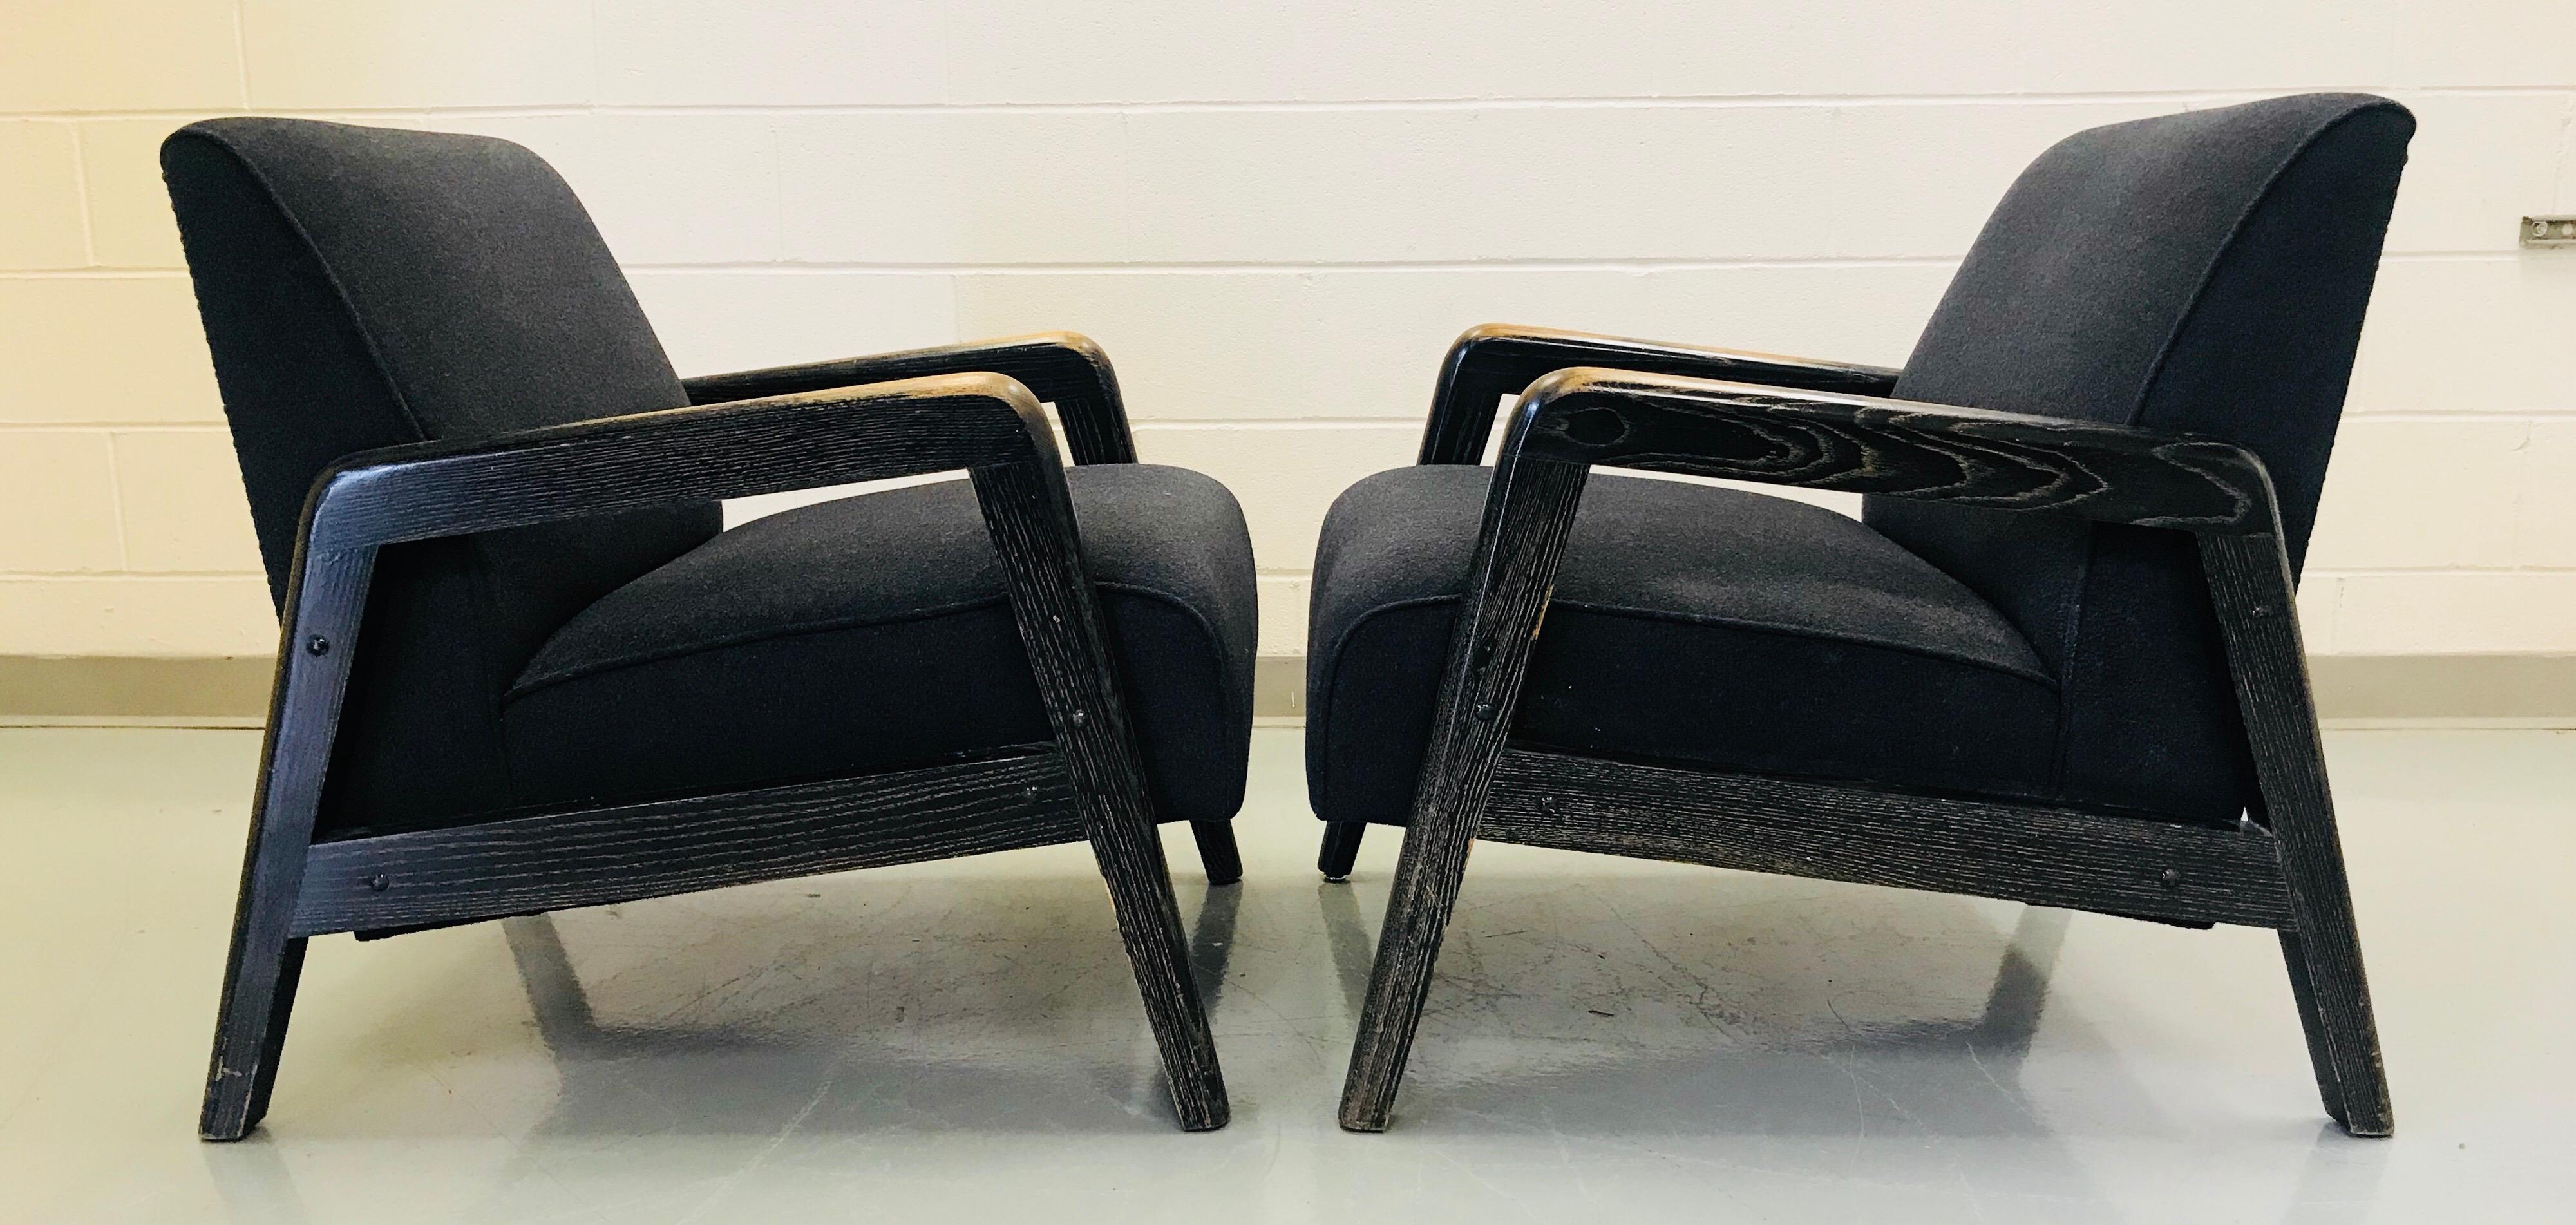 Pair of ebonized cerused wood lounge chairs. They have recently been reupholstered.